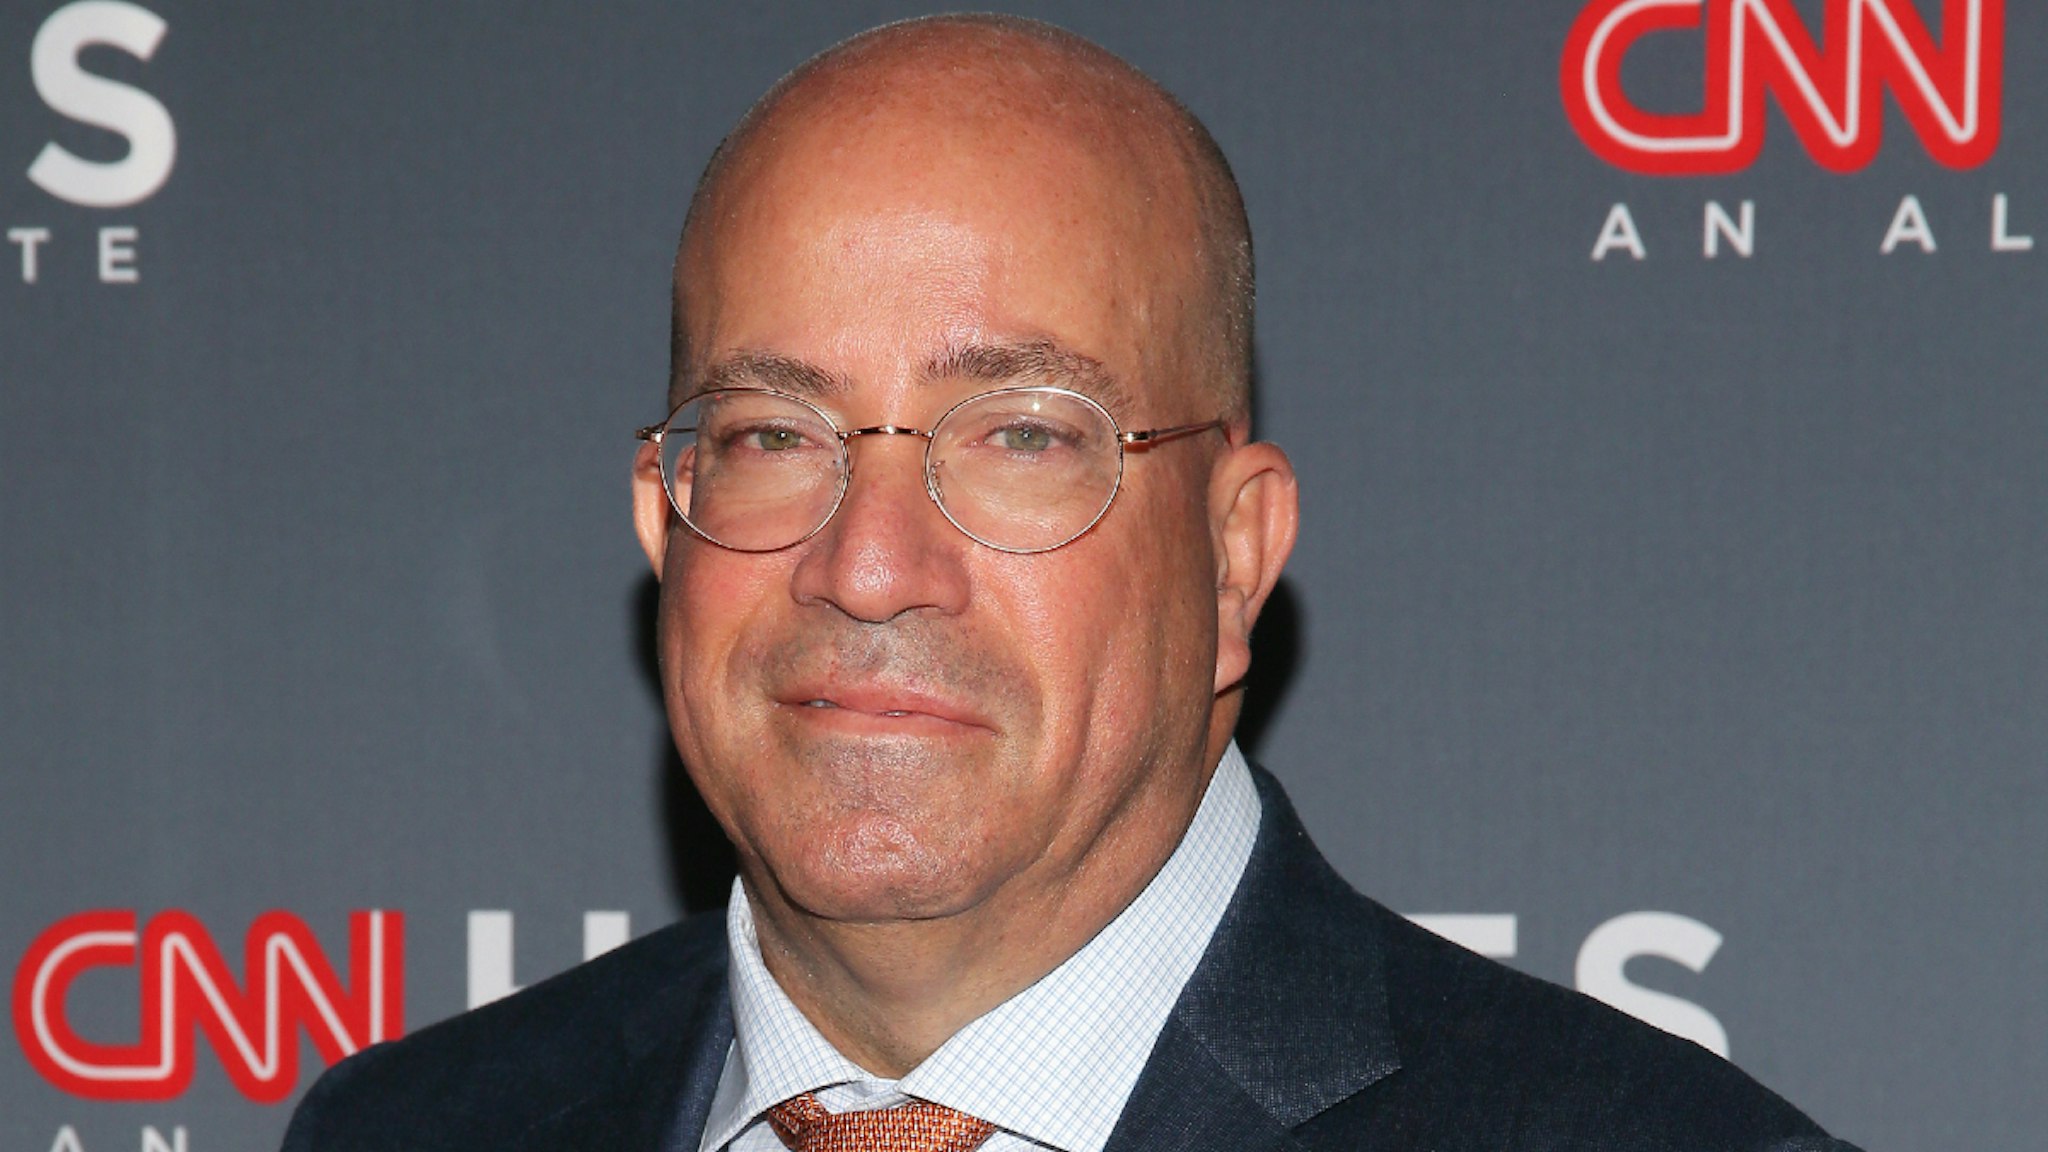 NEW YORK, NEW YORK - DECEMBER 08: Jeff Zucker attends the 13th Annual CNN Heroes at the American Museum of Natural History on December 08, 2019 in New York City.